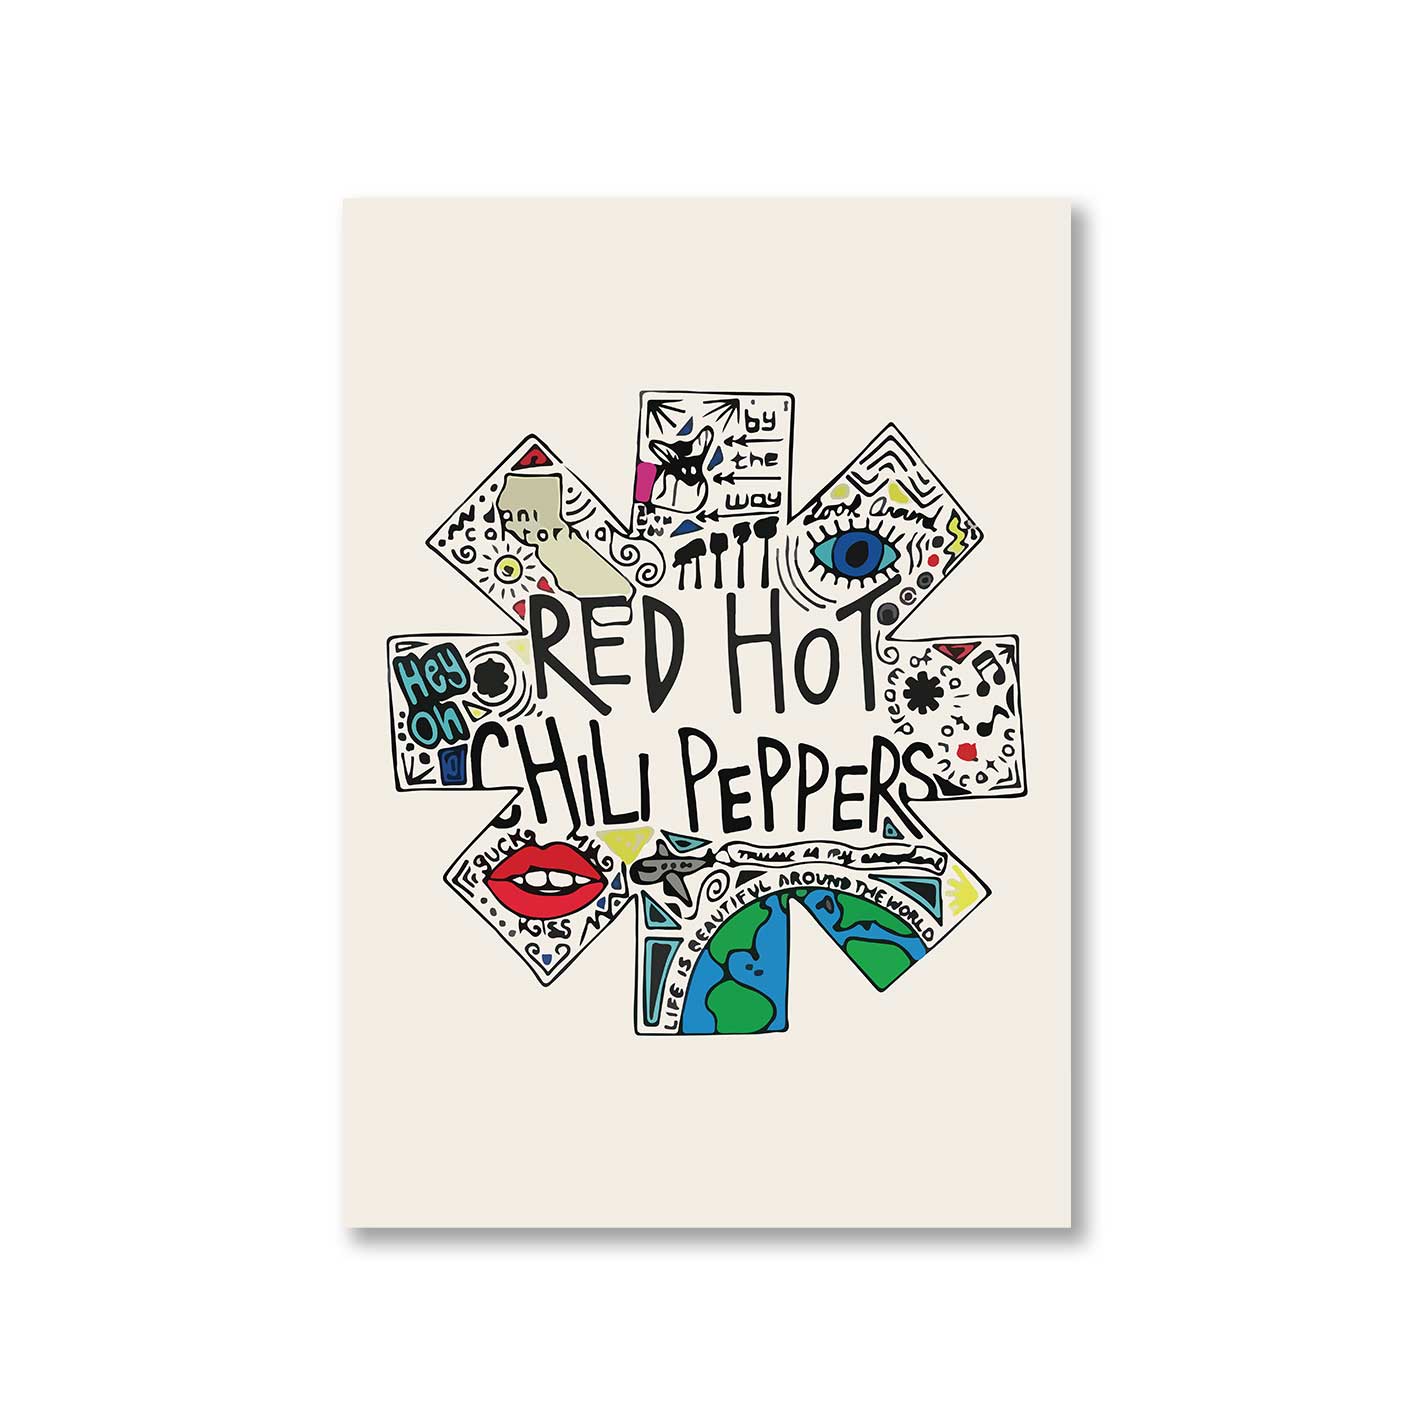 red hot chili peppers doodle poster wall art buy online united states of america usa the banyan tee tbt a4